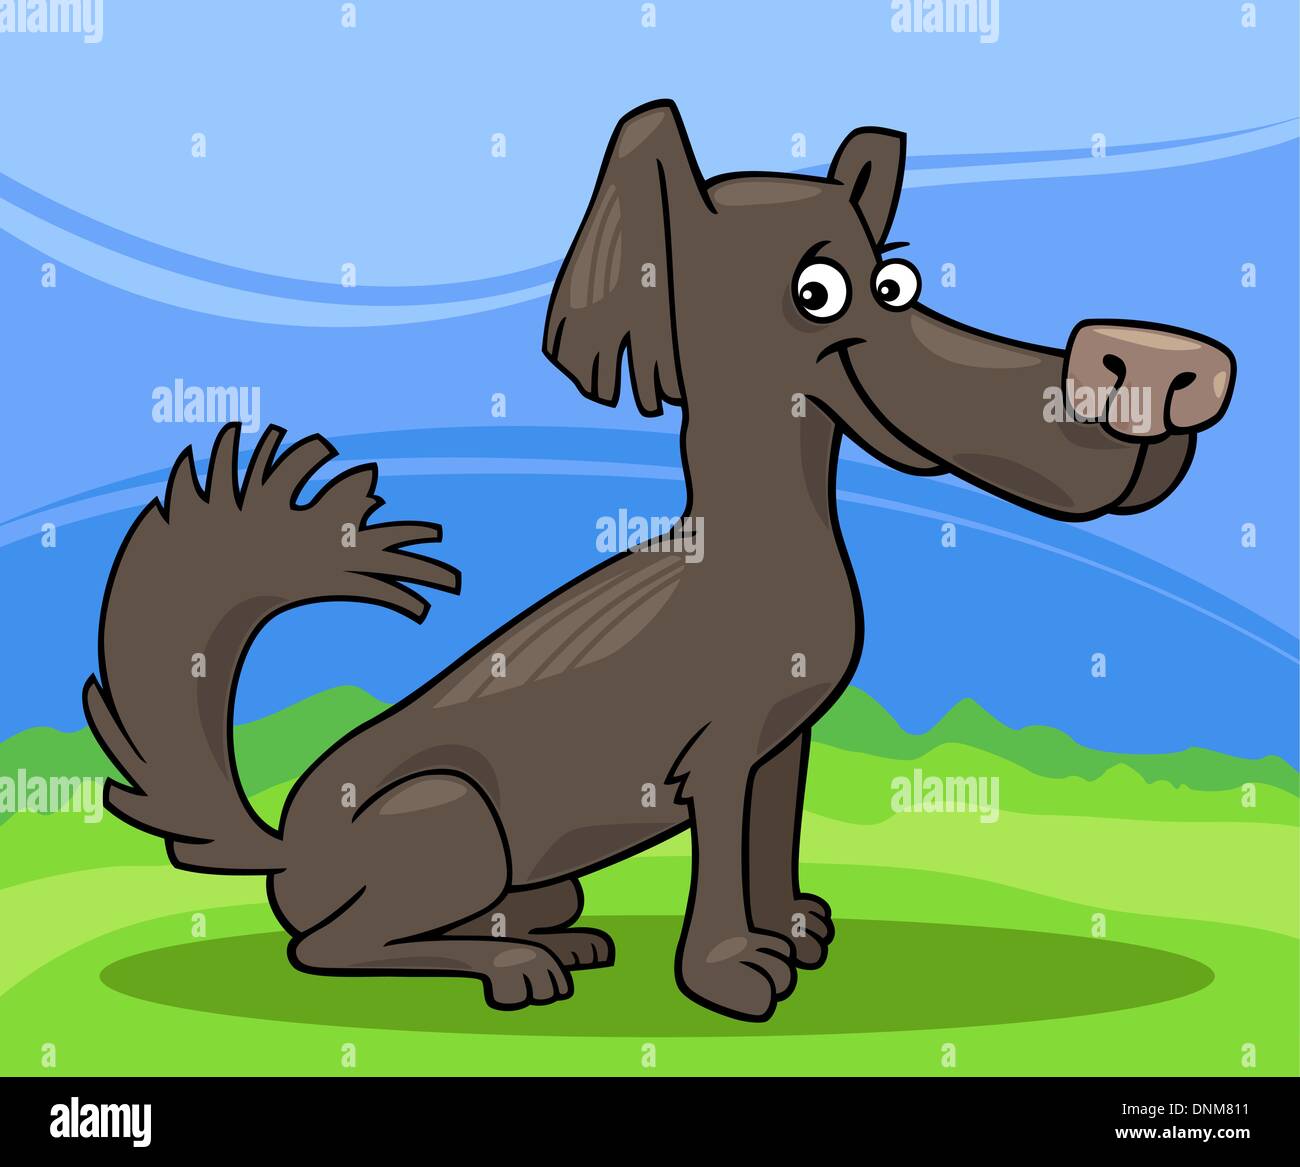 Cartoon Illustration of Funny Little Shaggy Dog against Blue Sky and Green Grass Stock Vector